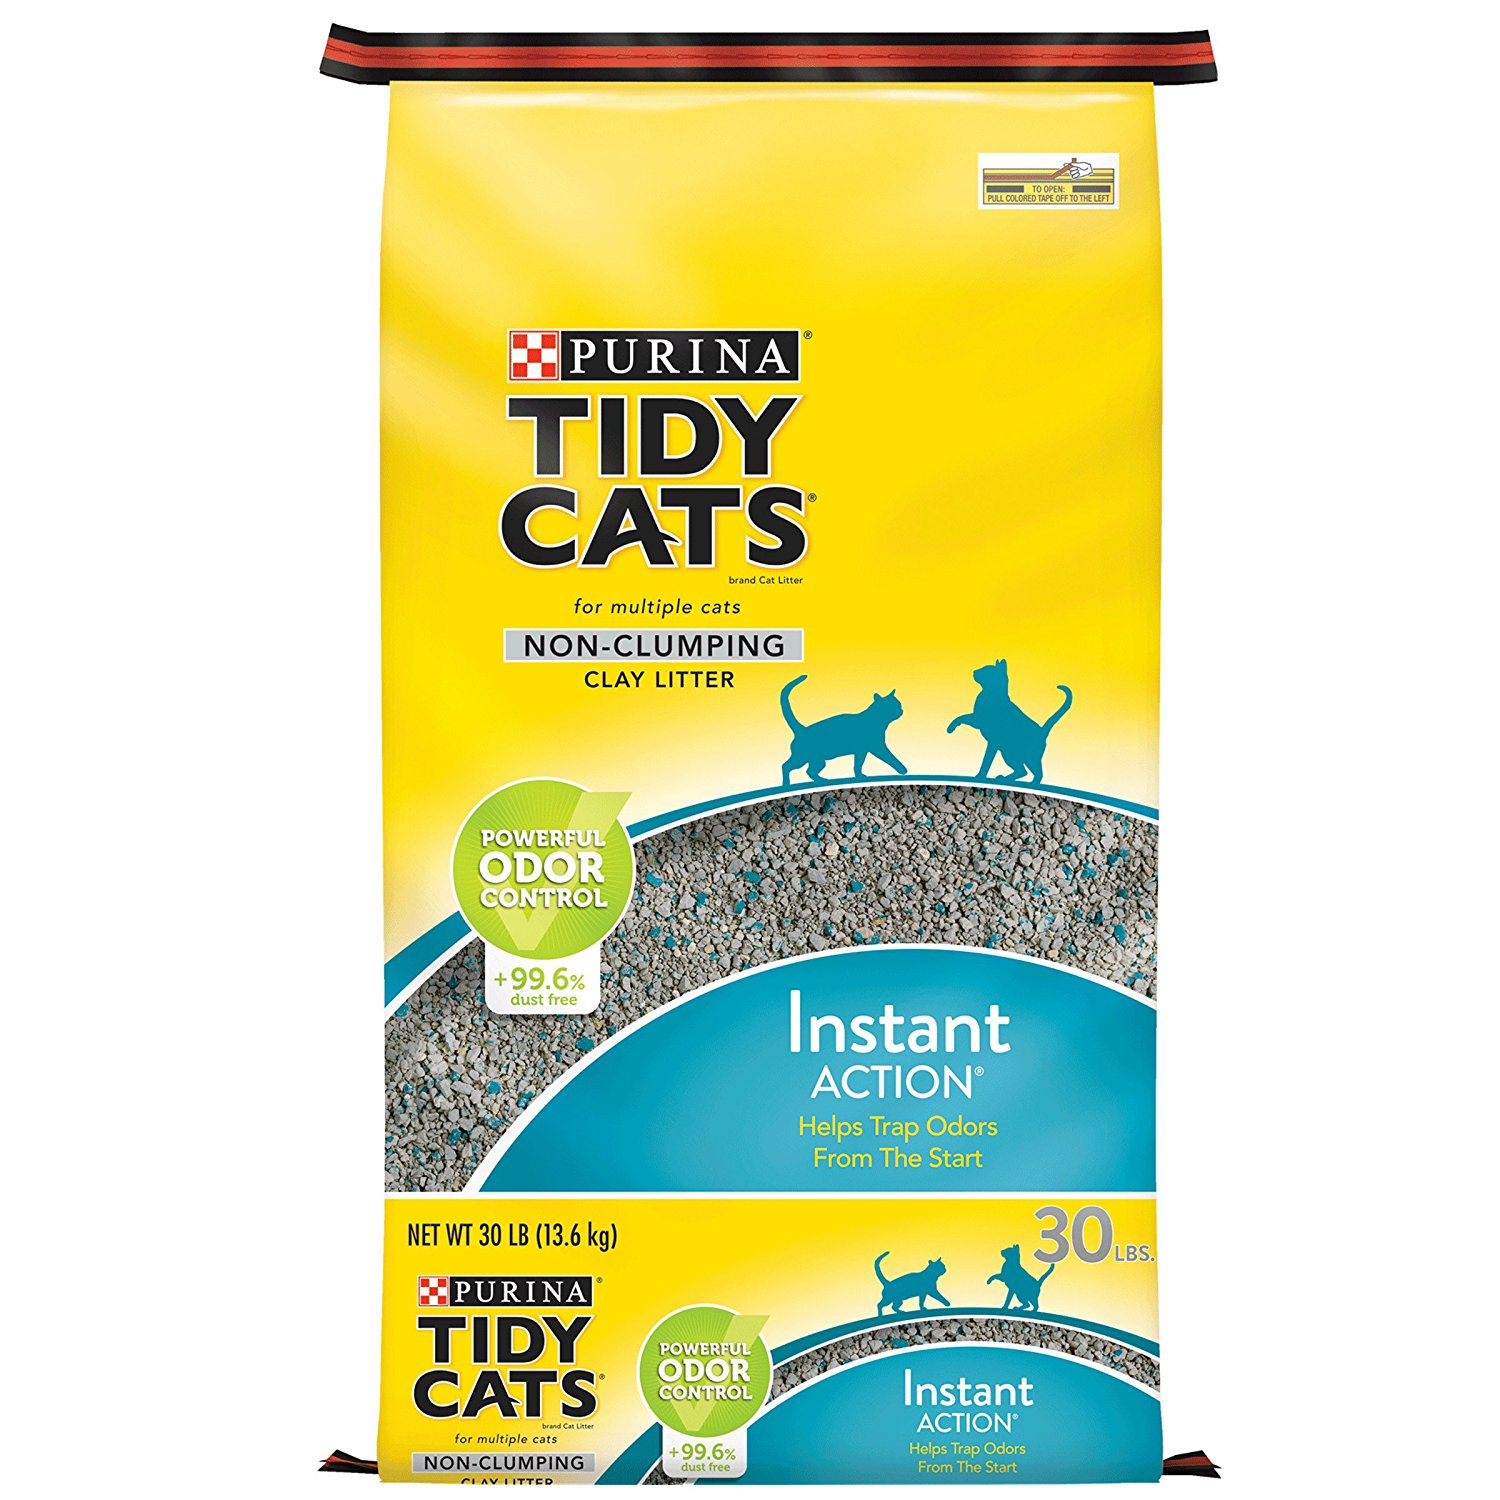 Purina Tidy Cats Instant Action Non-Clumping Cat Litter 30 Lbs Only $6.20